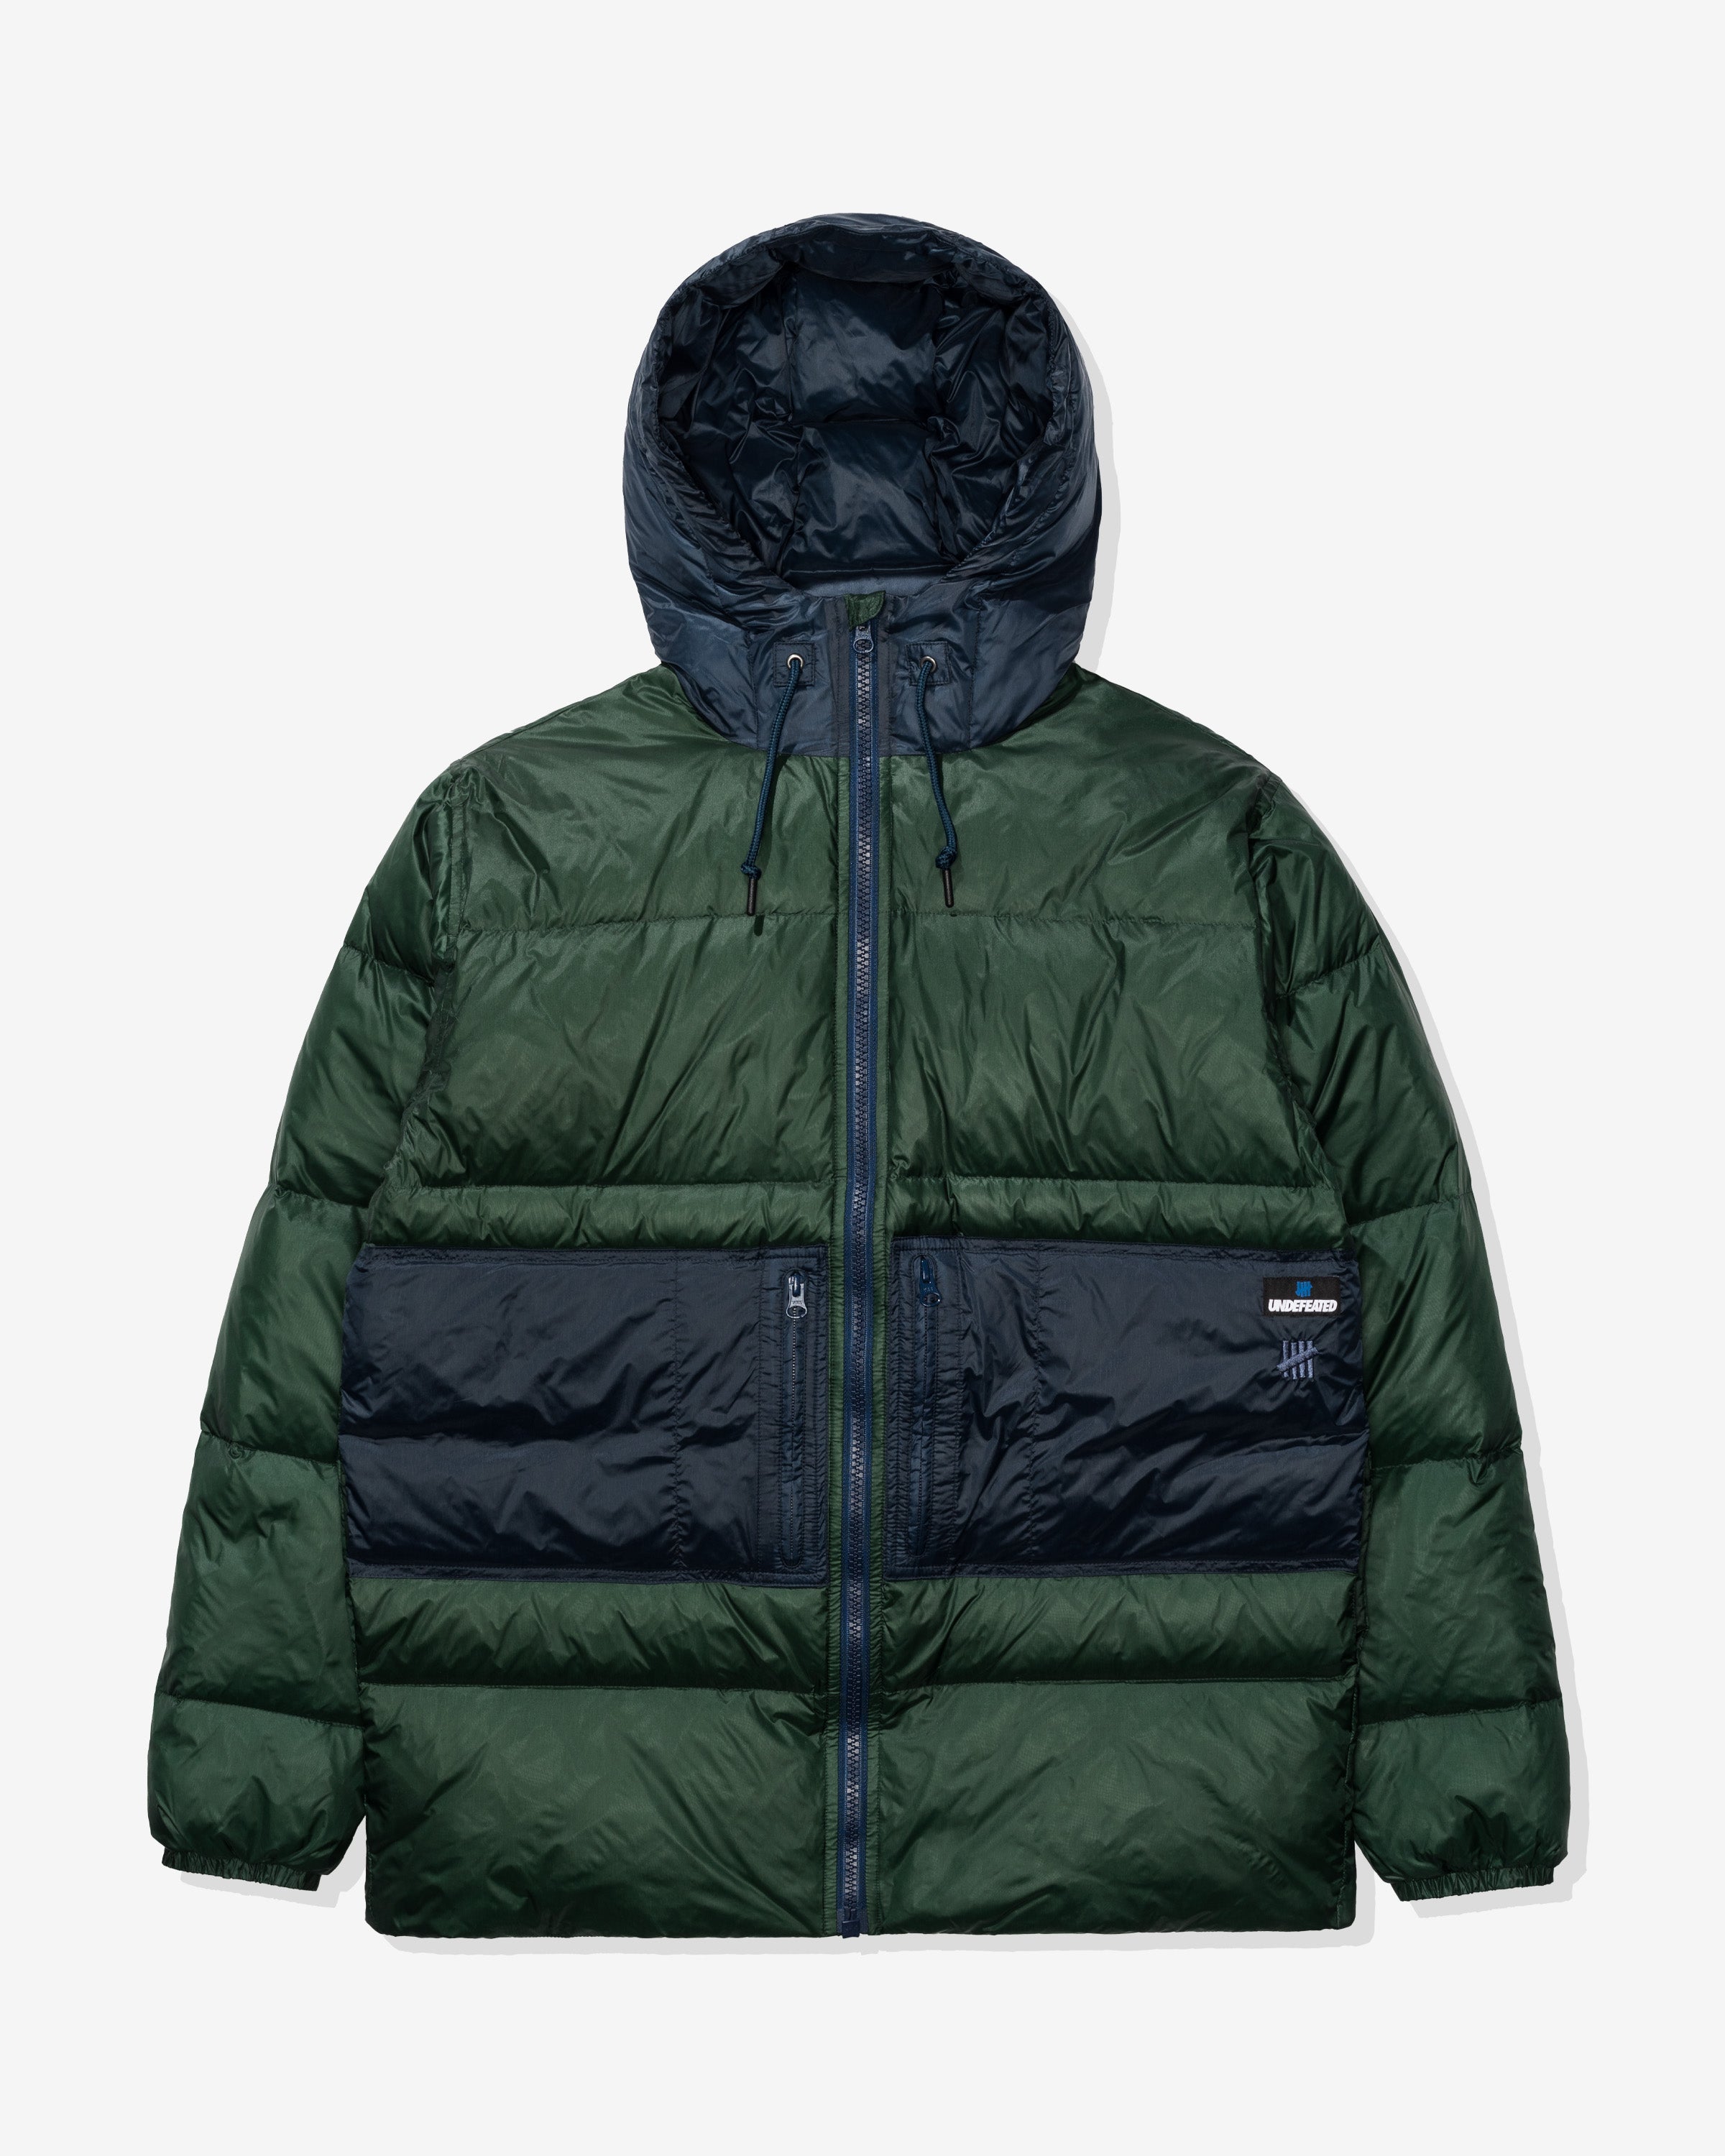 UNDEFEATED HOODED DOWN PUFFER JACKET – Undefeated